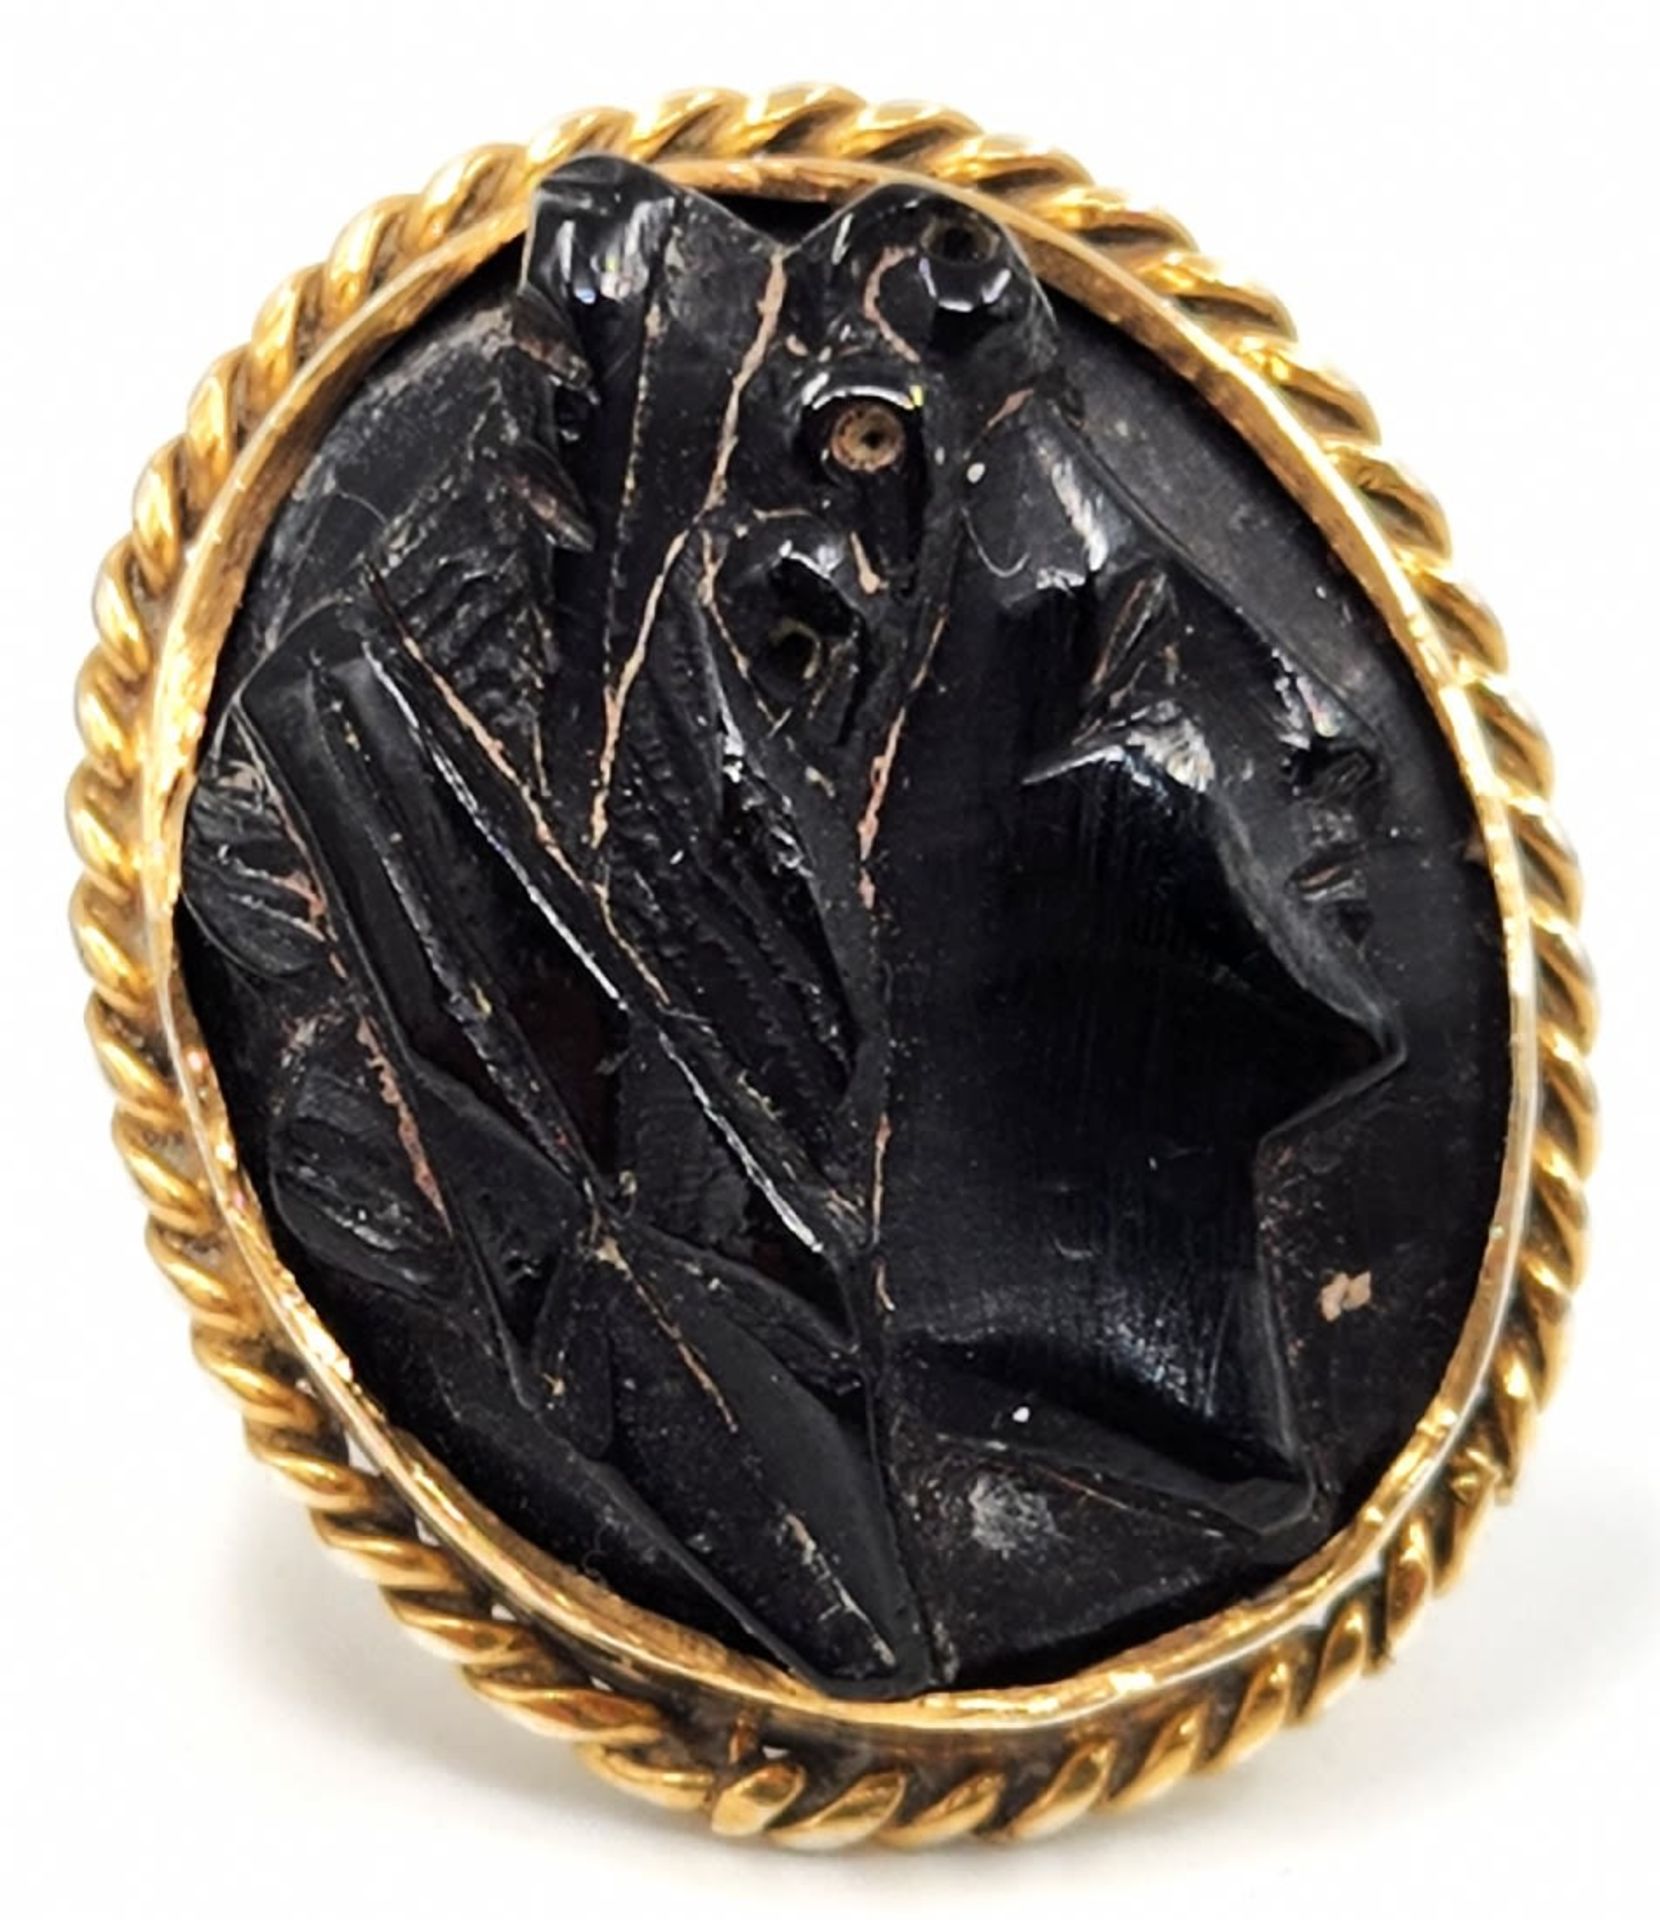 Antique 19th century English cameo 9K gold ring inlaid with a Whitby Jet plate, unsigned, the purity